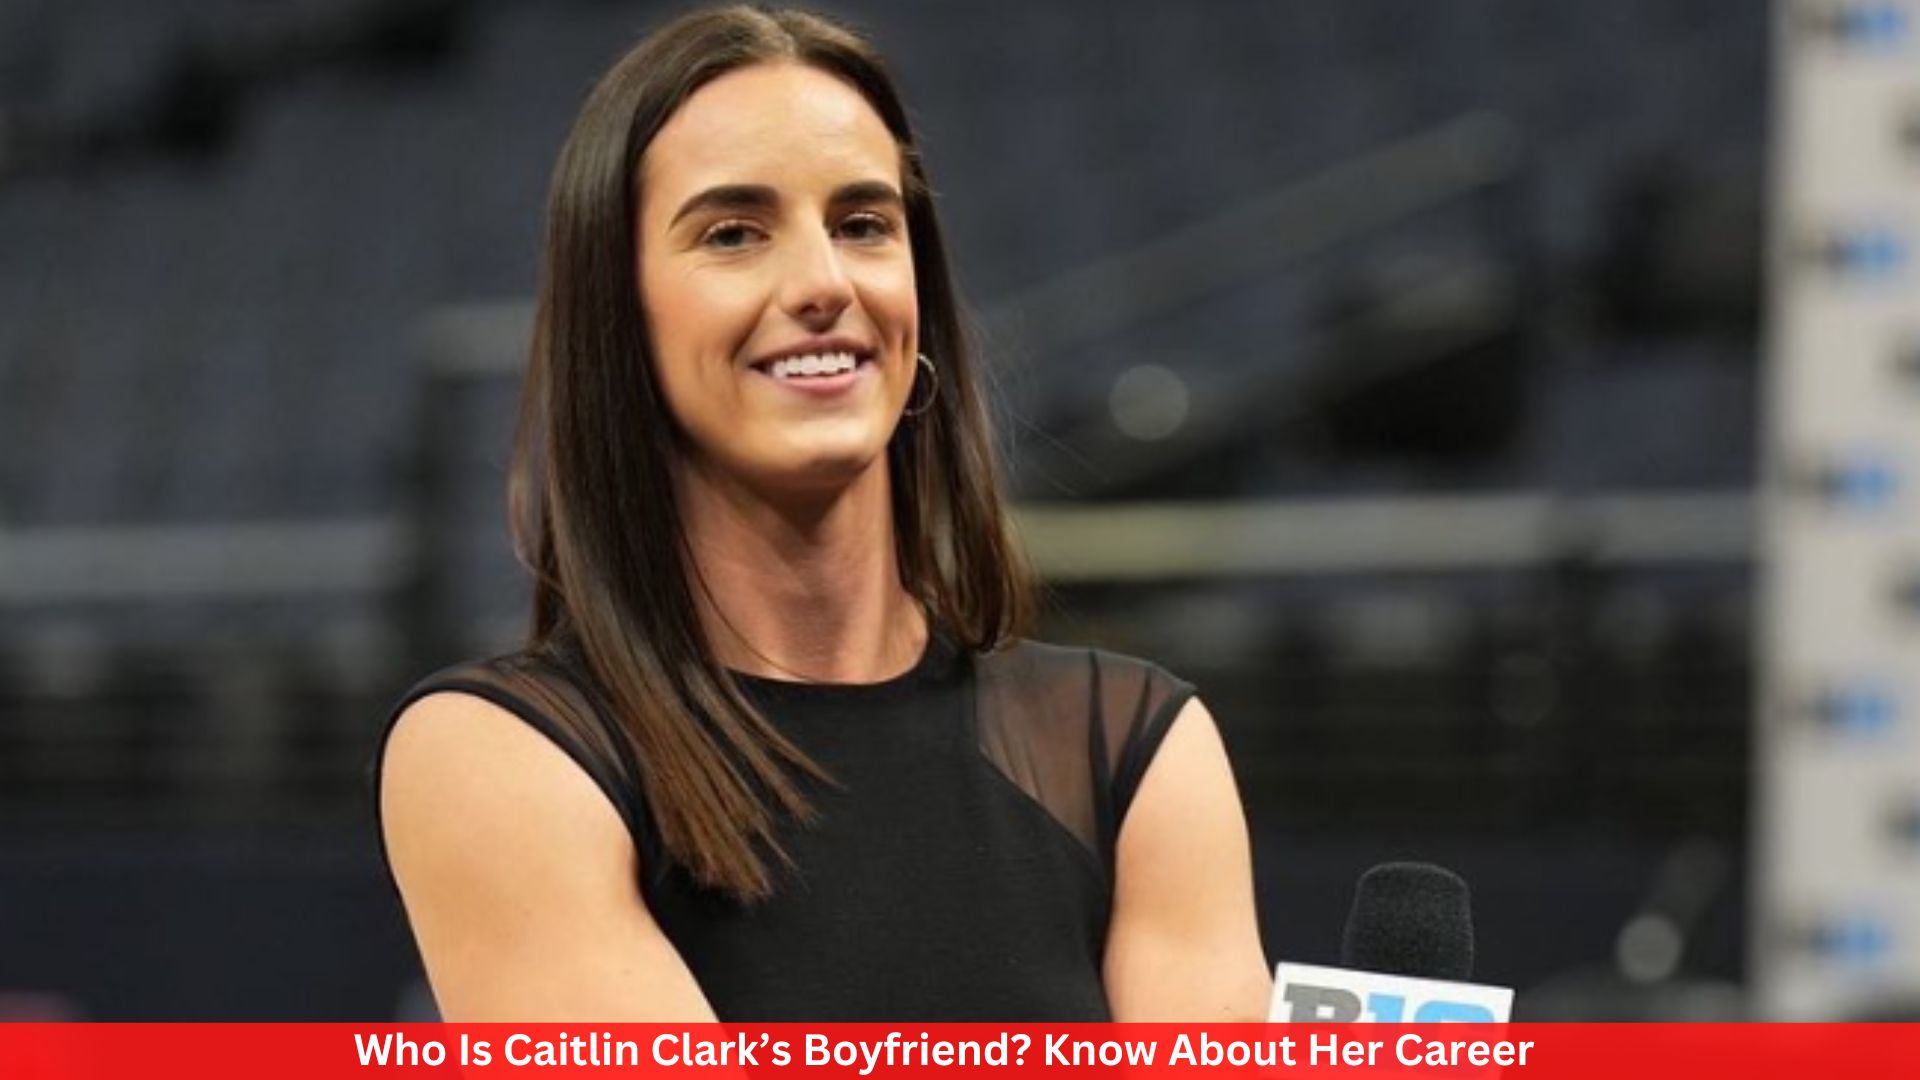 Who Is Caitlin Clark’s Boyfriend? Know About Her Career